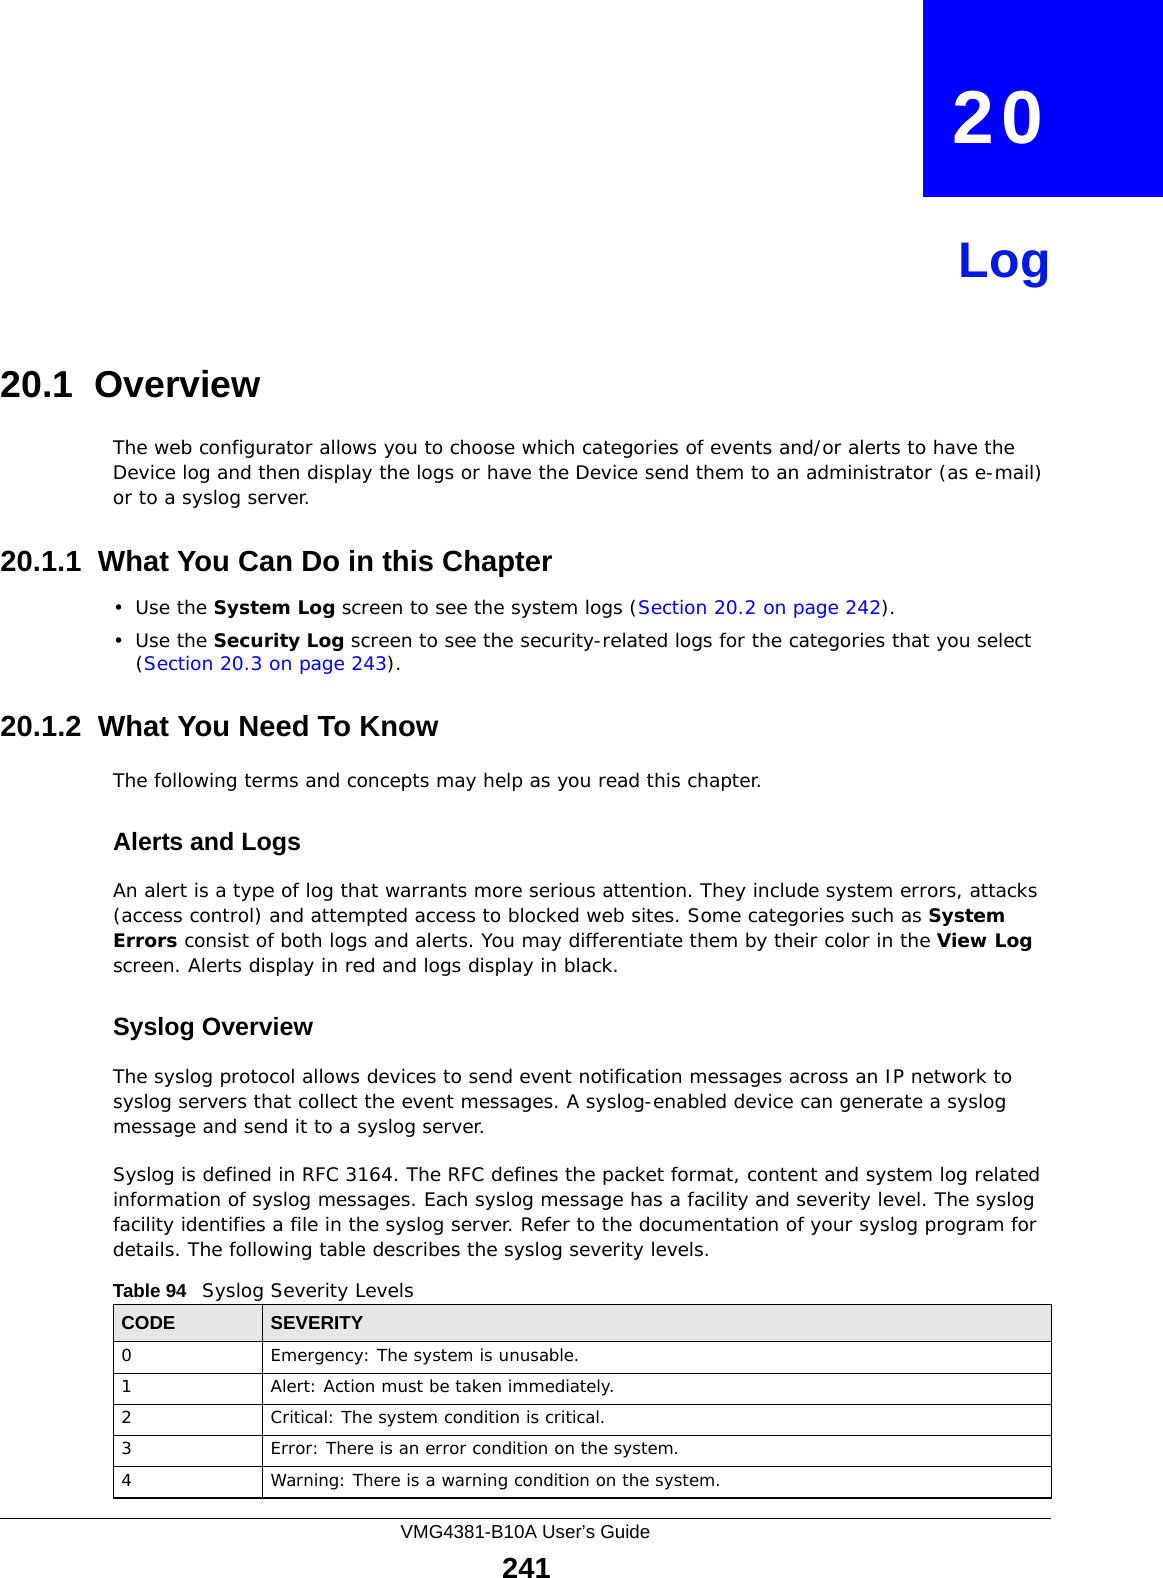 VMG4381-B10A User’s Guide241CHAPTER   20Log20.1  OverviewThe web configurator allows you to choose which categories of events and/or alerts to have the Device log and then display the logs or have the Device send them to an administrator (as e-mail) or to a syslog server. 20.1.1  What You Can Do in this Chapter•Use the System Log screen to see the system logs (Section 20.2 on page 242).•Use the Security Log screen to see the security-related logs for the categories that you select (Section 20.3 on page 243).20.1.2  What You Need To KnowThe following terms and concepts may help as you read this chapter.Alerts and LogsAn alert is a type of log that warrants more serious attention. They include system errors, attacks (access control) and attempted access to blocked web sites. Some categories such as System Errors consist of both logs and alerts. You may differentiate them by their color in the View Log screen. Alerts display in red and logs display in black.Syslog Overview The syslog protocol allows devices to send event notification messages across an IP network to syslog servers that collect the event messages. A syslog-enabled device can generate a syslog message and send it to a syslog server.Syslog is defined in RFC 3164. The RFC defines the packet format, content and system log related information of syslog messages. Each syslog message has a facility and severity level. The syslog facility identifies a file in the syslog server. Refer to the documentation of your syslog program for details. The following table describes the syslog severity levels. Table 94   Syslog Severity LevelsCODE SEVERITY0 Emergency: The system is unusable.1 Alert: Action must be taken immediately.2 Critical: The system condition is critical.3 Error: There is an error condition on the system.4 Warning: There is a warning condition on the system.